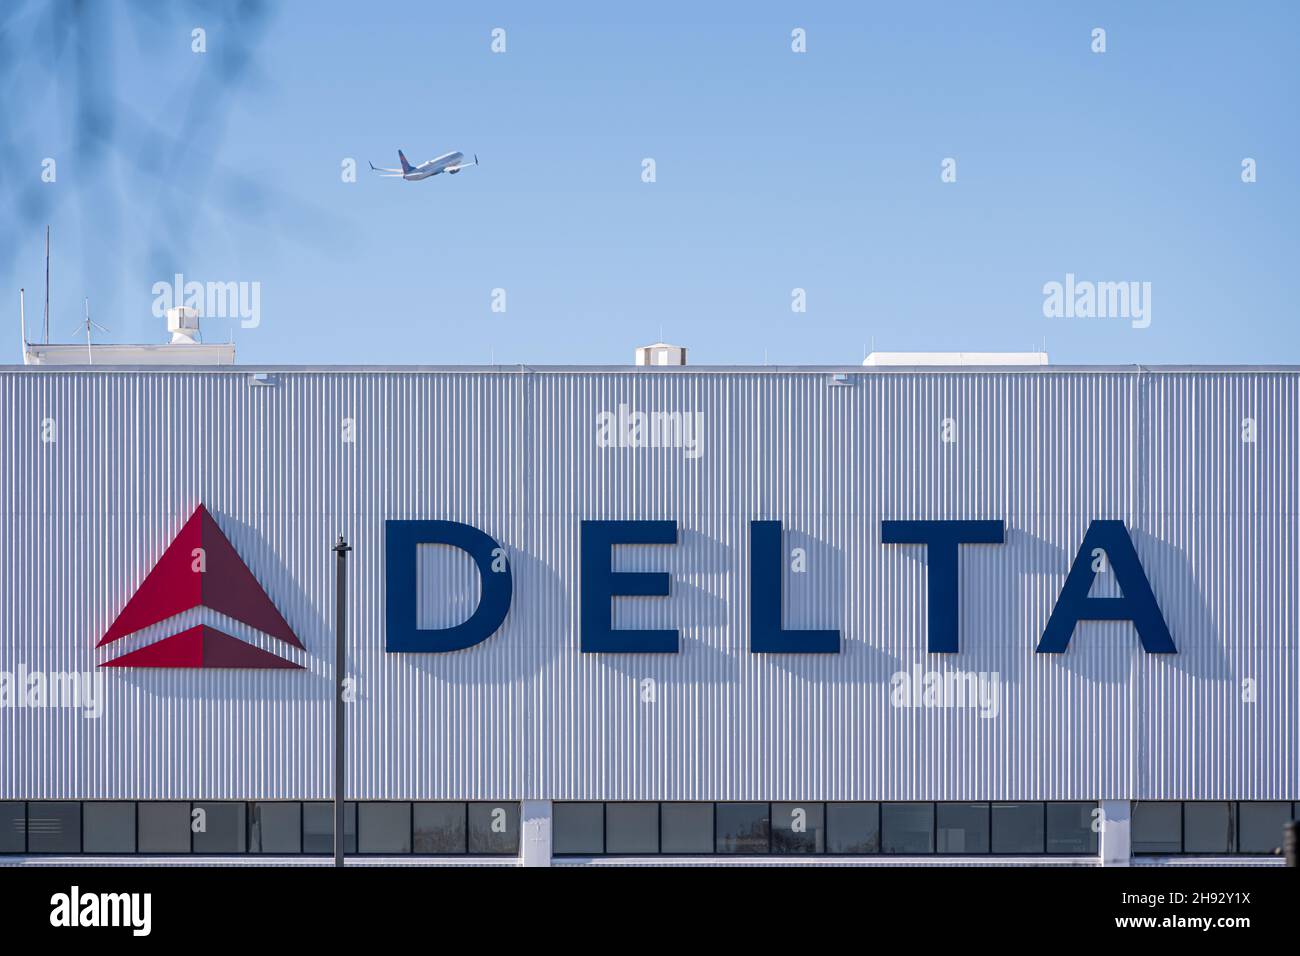 Delta Air Lines TechOps at Hartsfield-Jackson Atlanta International Airport is the largest airline maintenance and repair provider in North America. Stock Photo